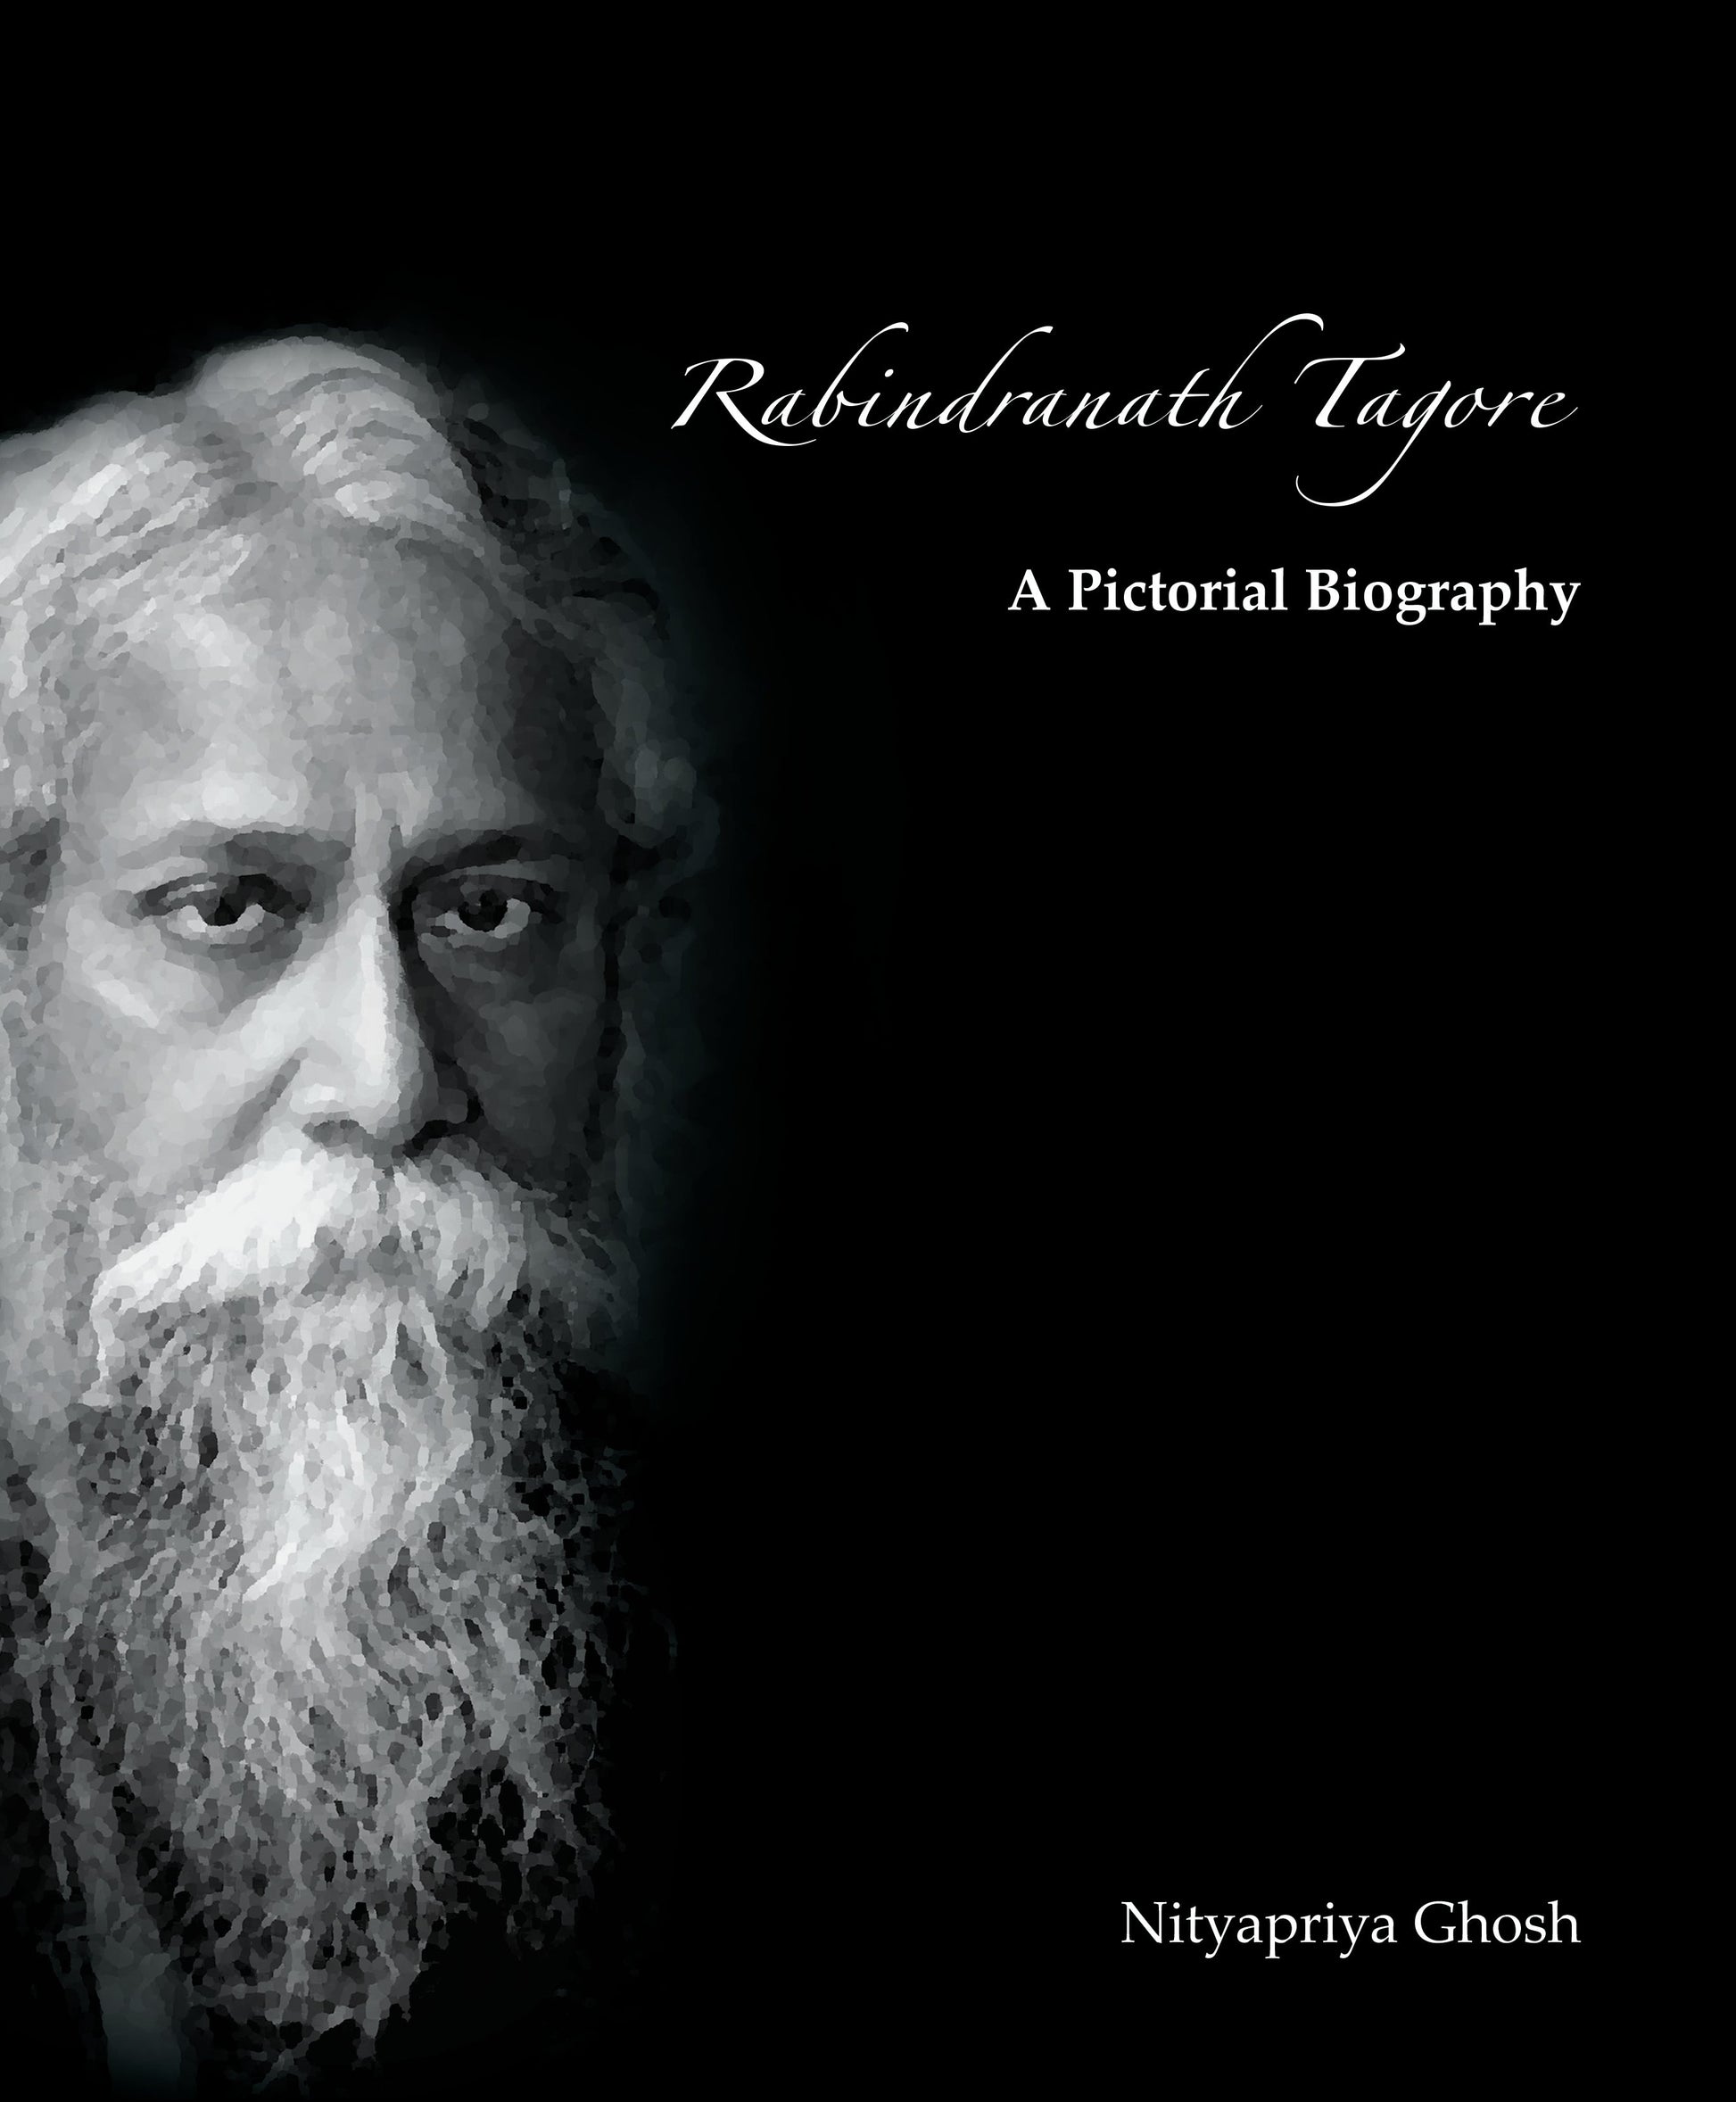 Rabindranath Tagore: A Pictorial Biography